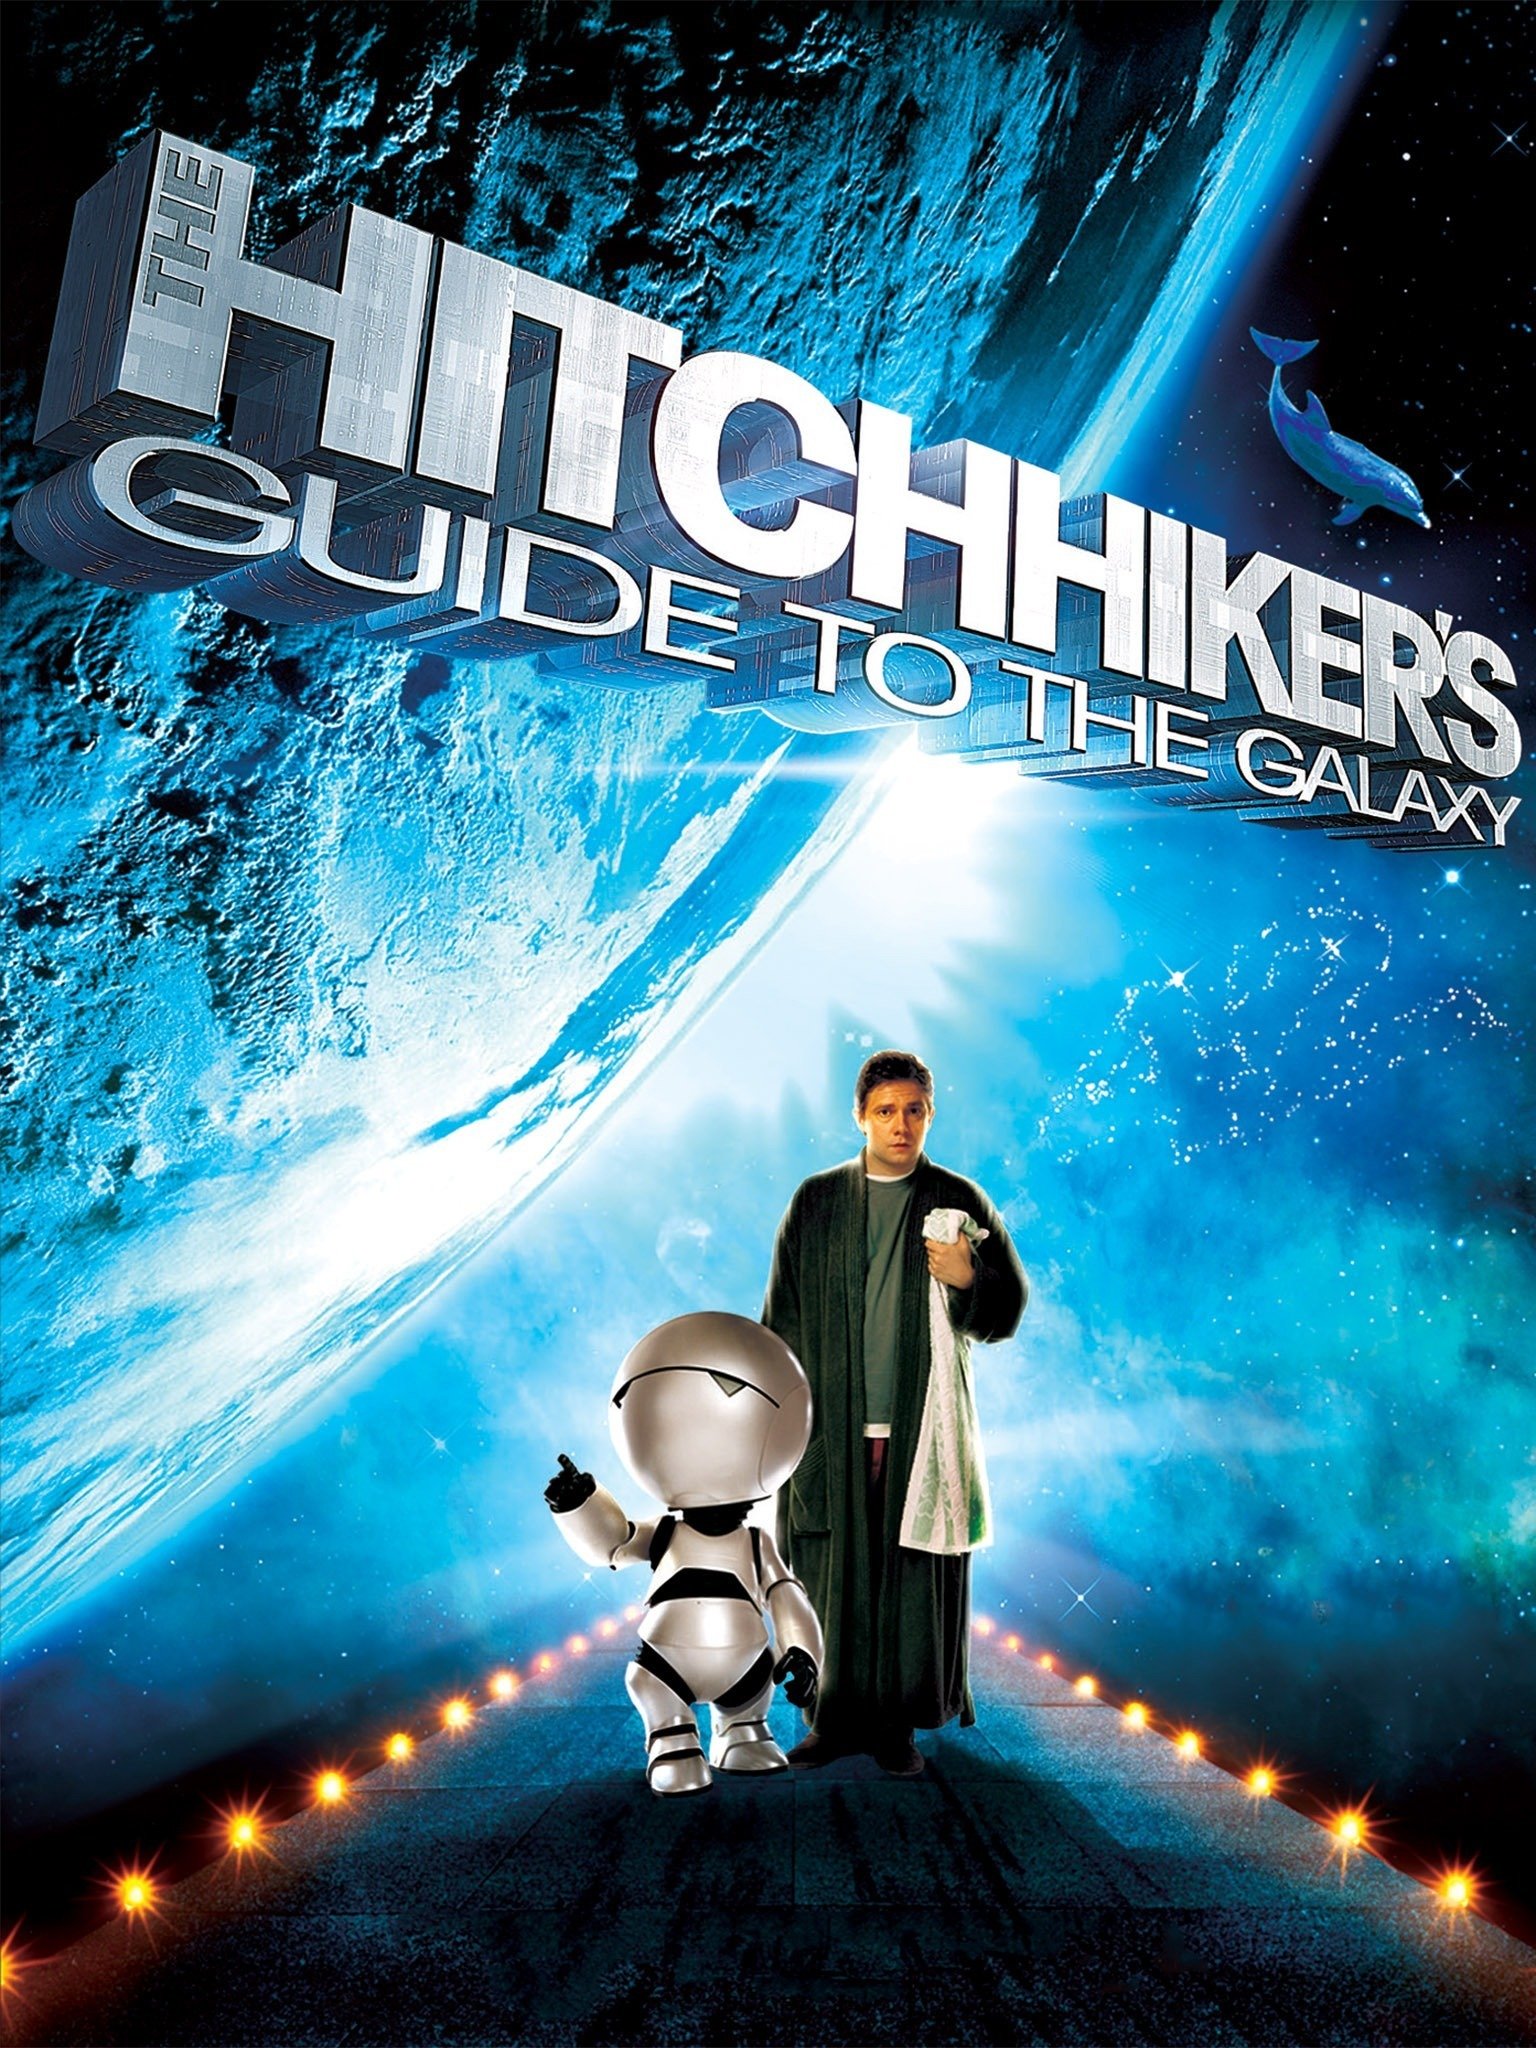 The Hitchhiker's Guide to the Galaxy Movie Reviews